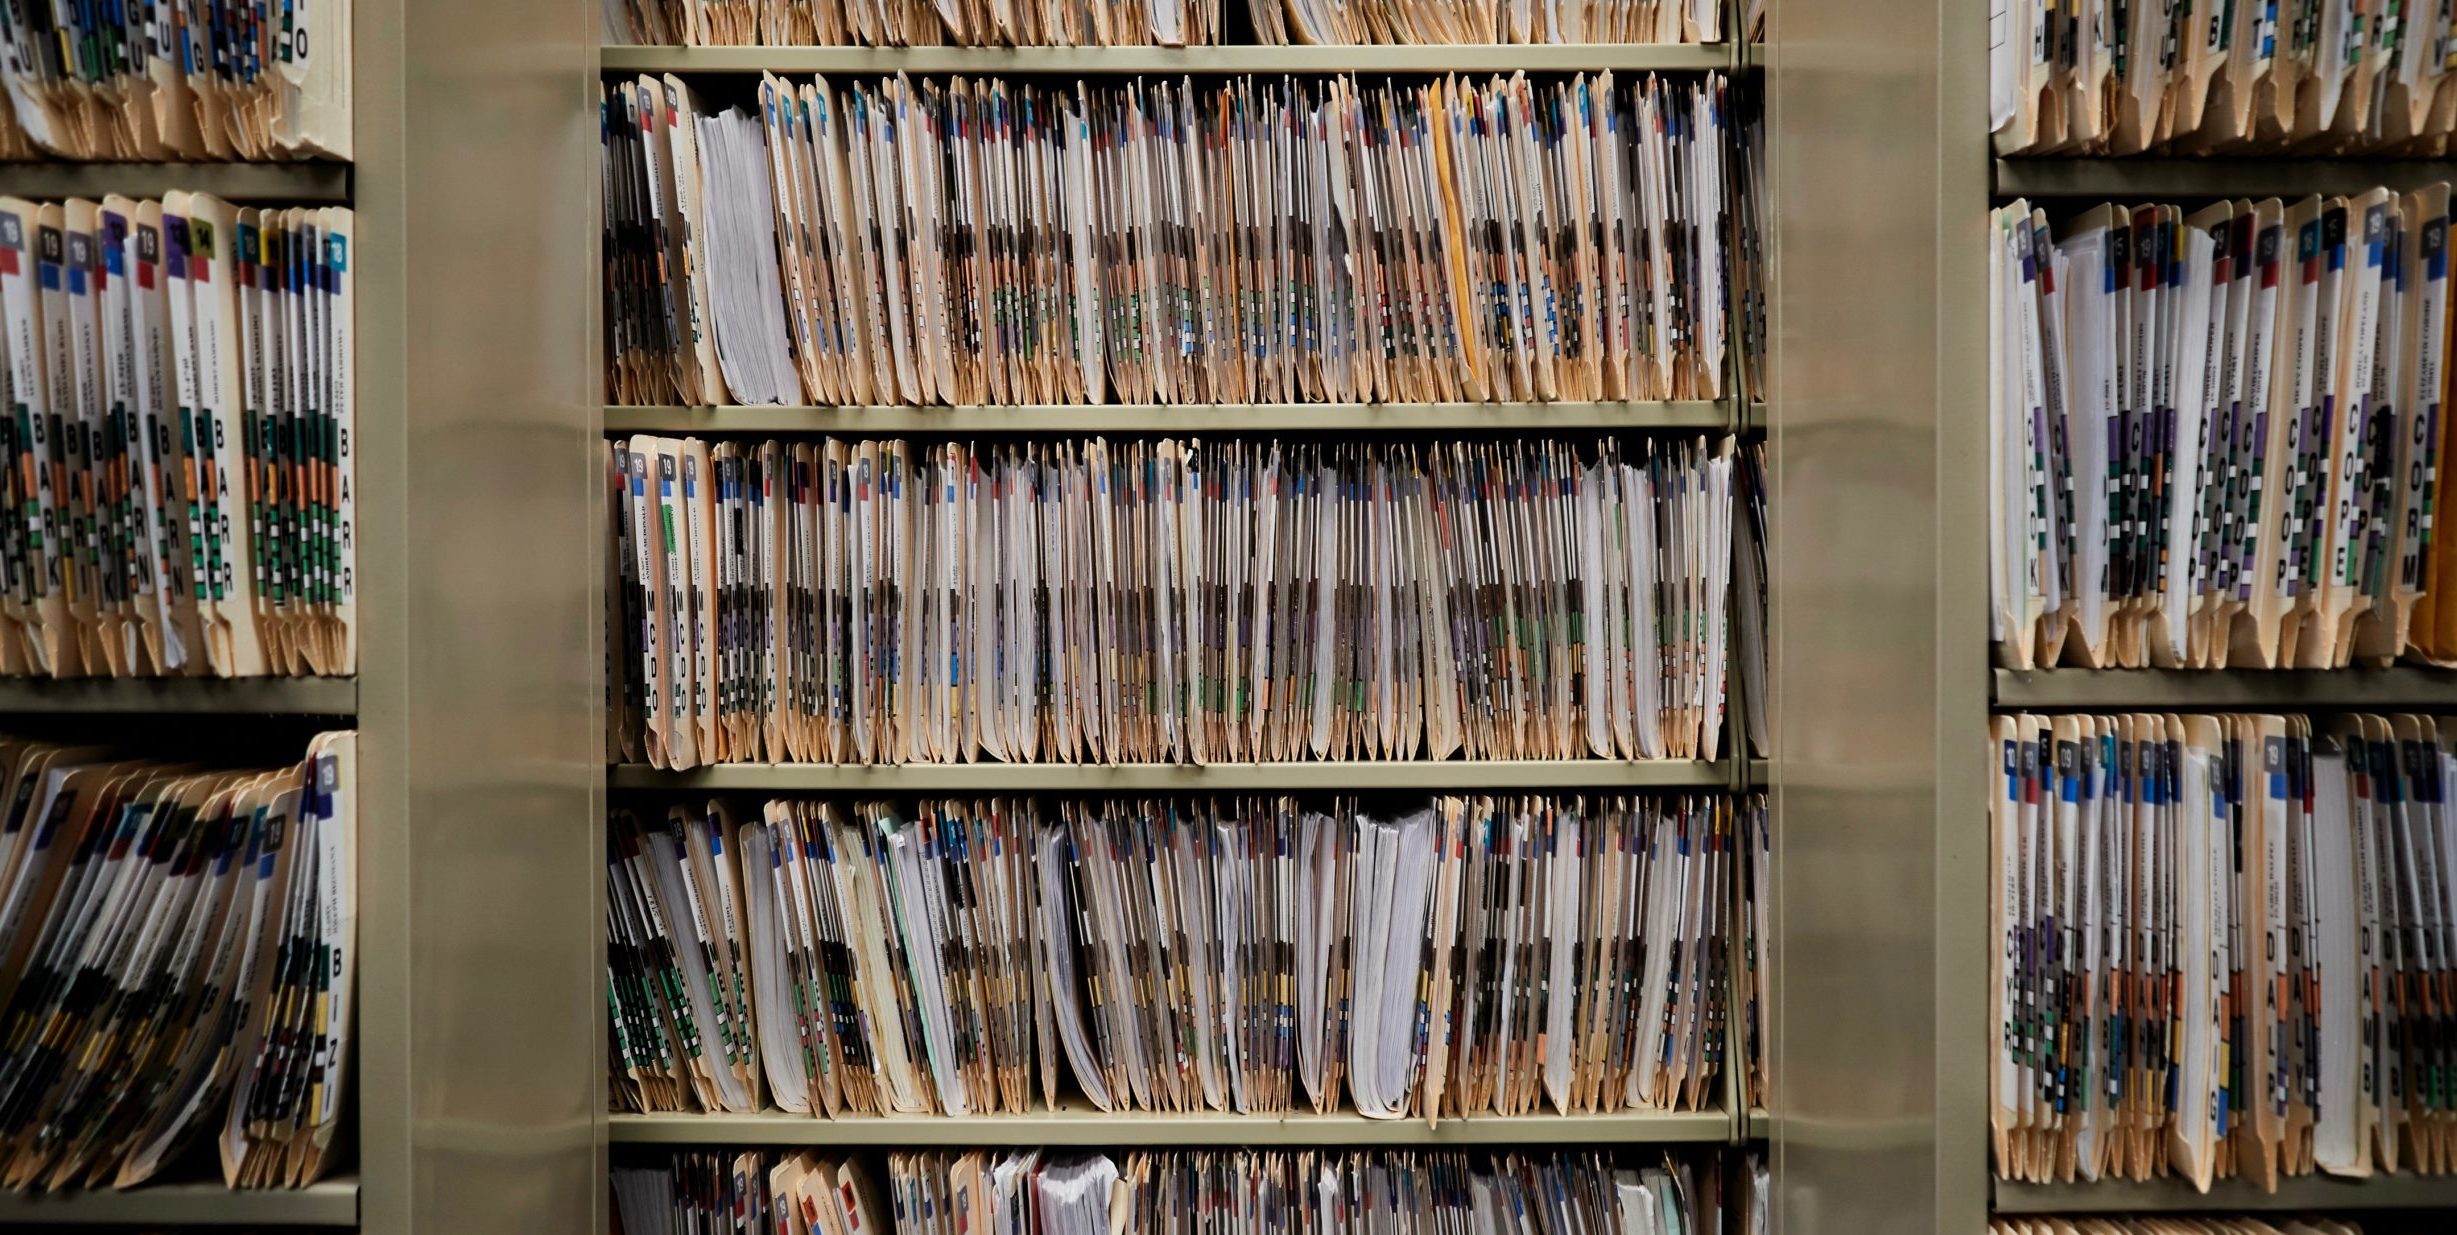 Thousands of paper court records line multiple shelves in an office.